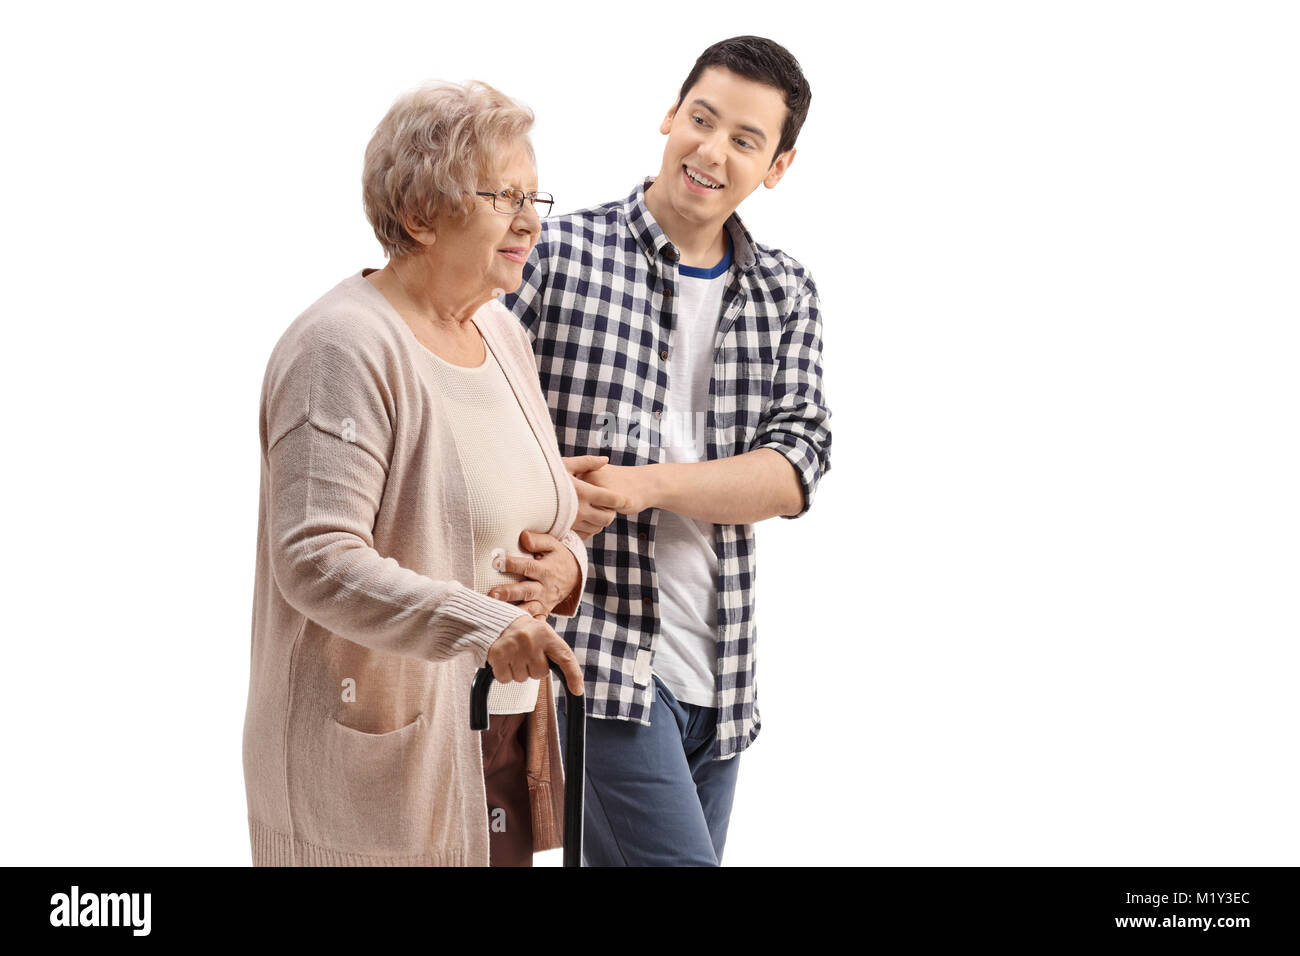 Young man holding an elderly woman with a walking cane isolated on white background Stock Photo